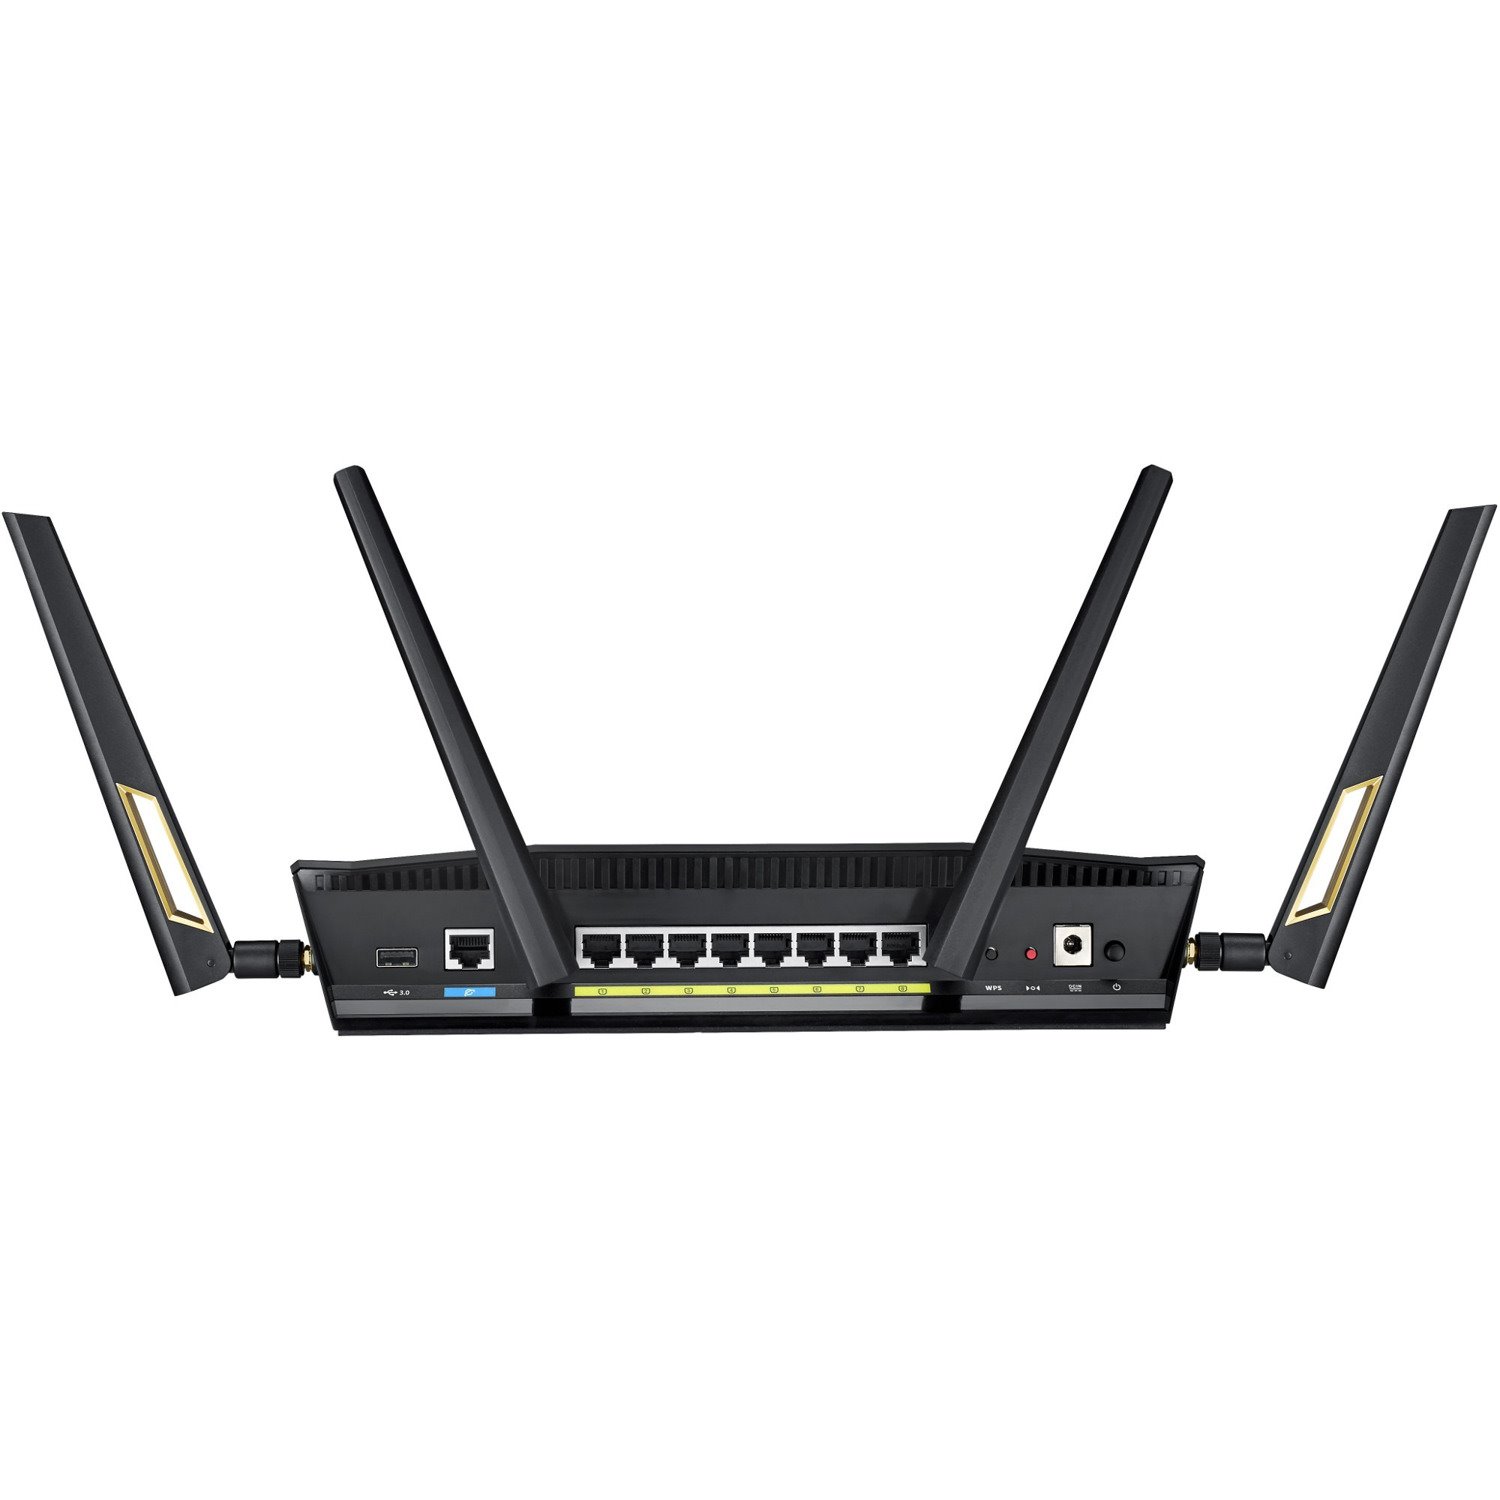 Asus AX6000 Wi-Fi 6 IEEE 802.11ax Ethernet Wireless Router